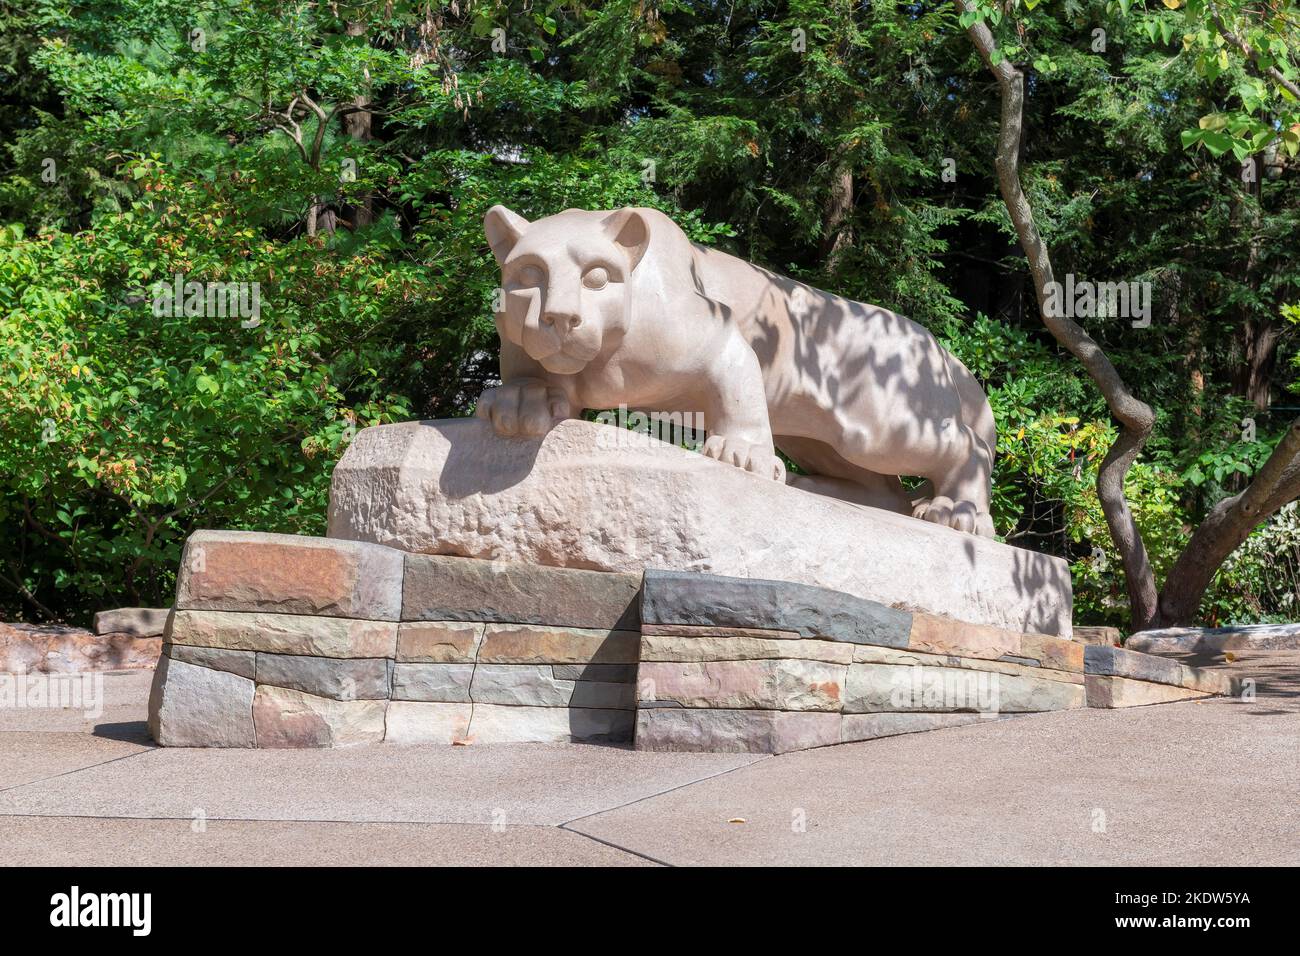 Penn State Nittany Lion in Penn State University, State College, Pennsylvania. Stock Photo